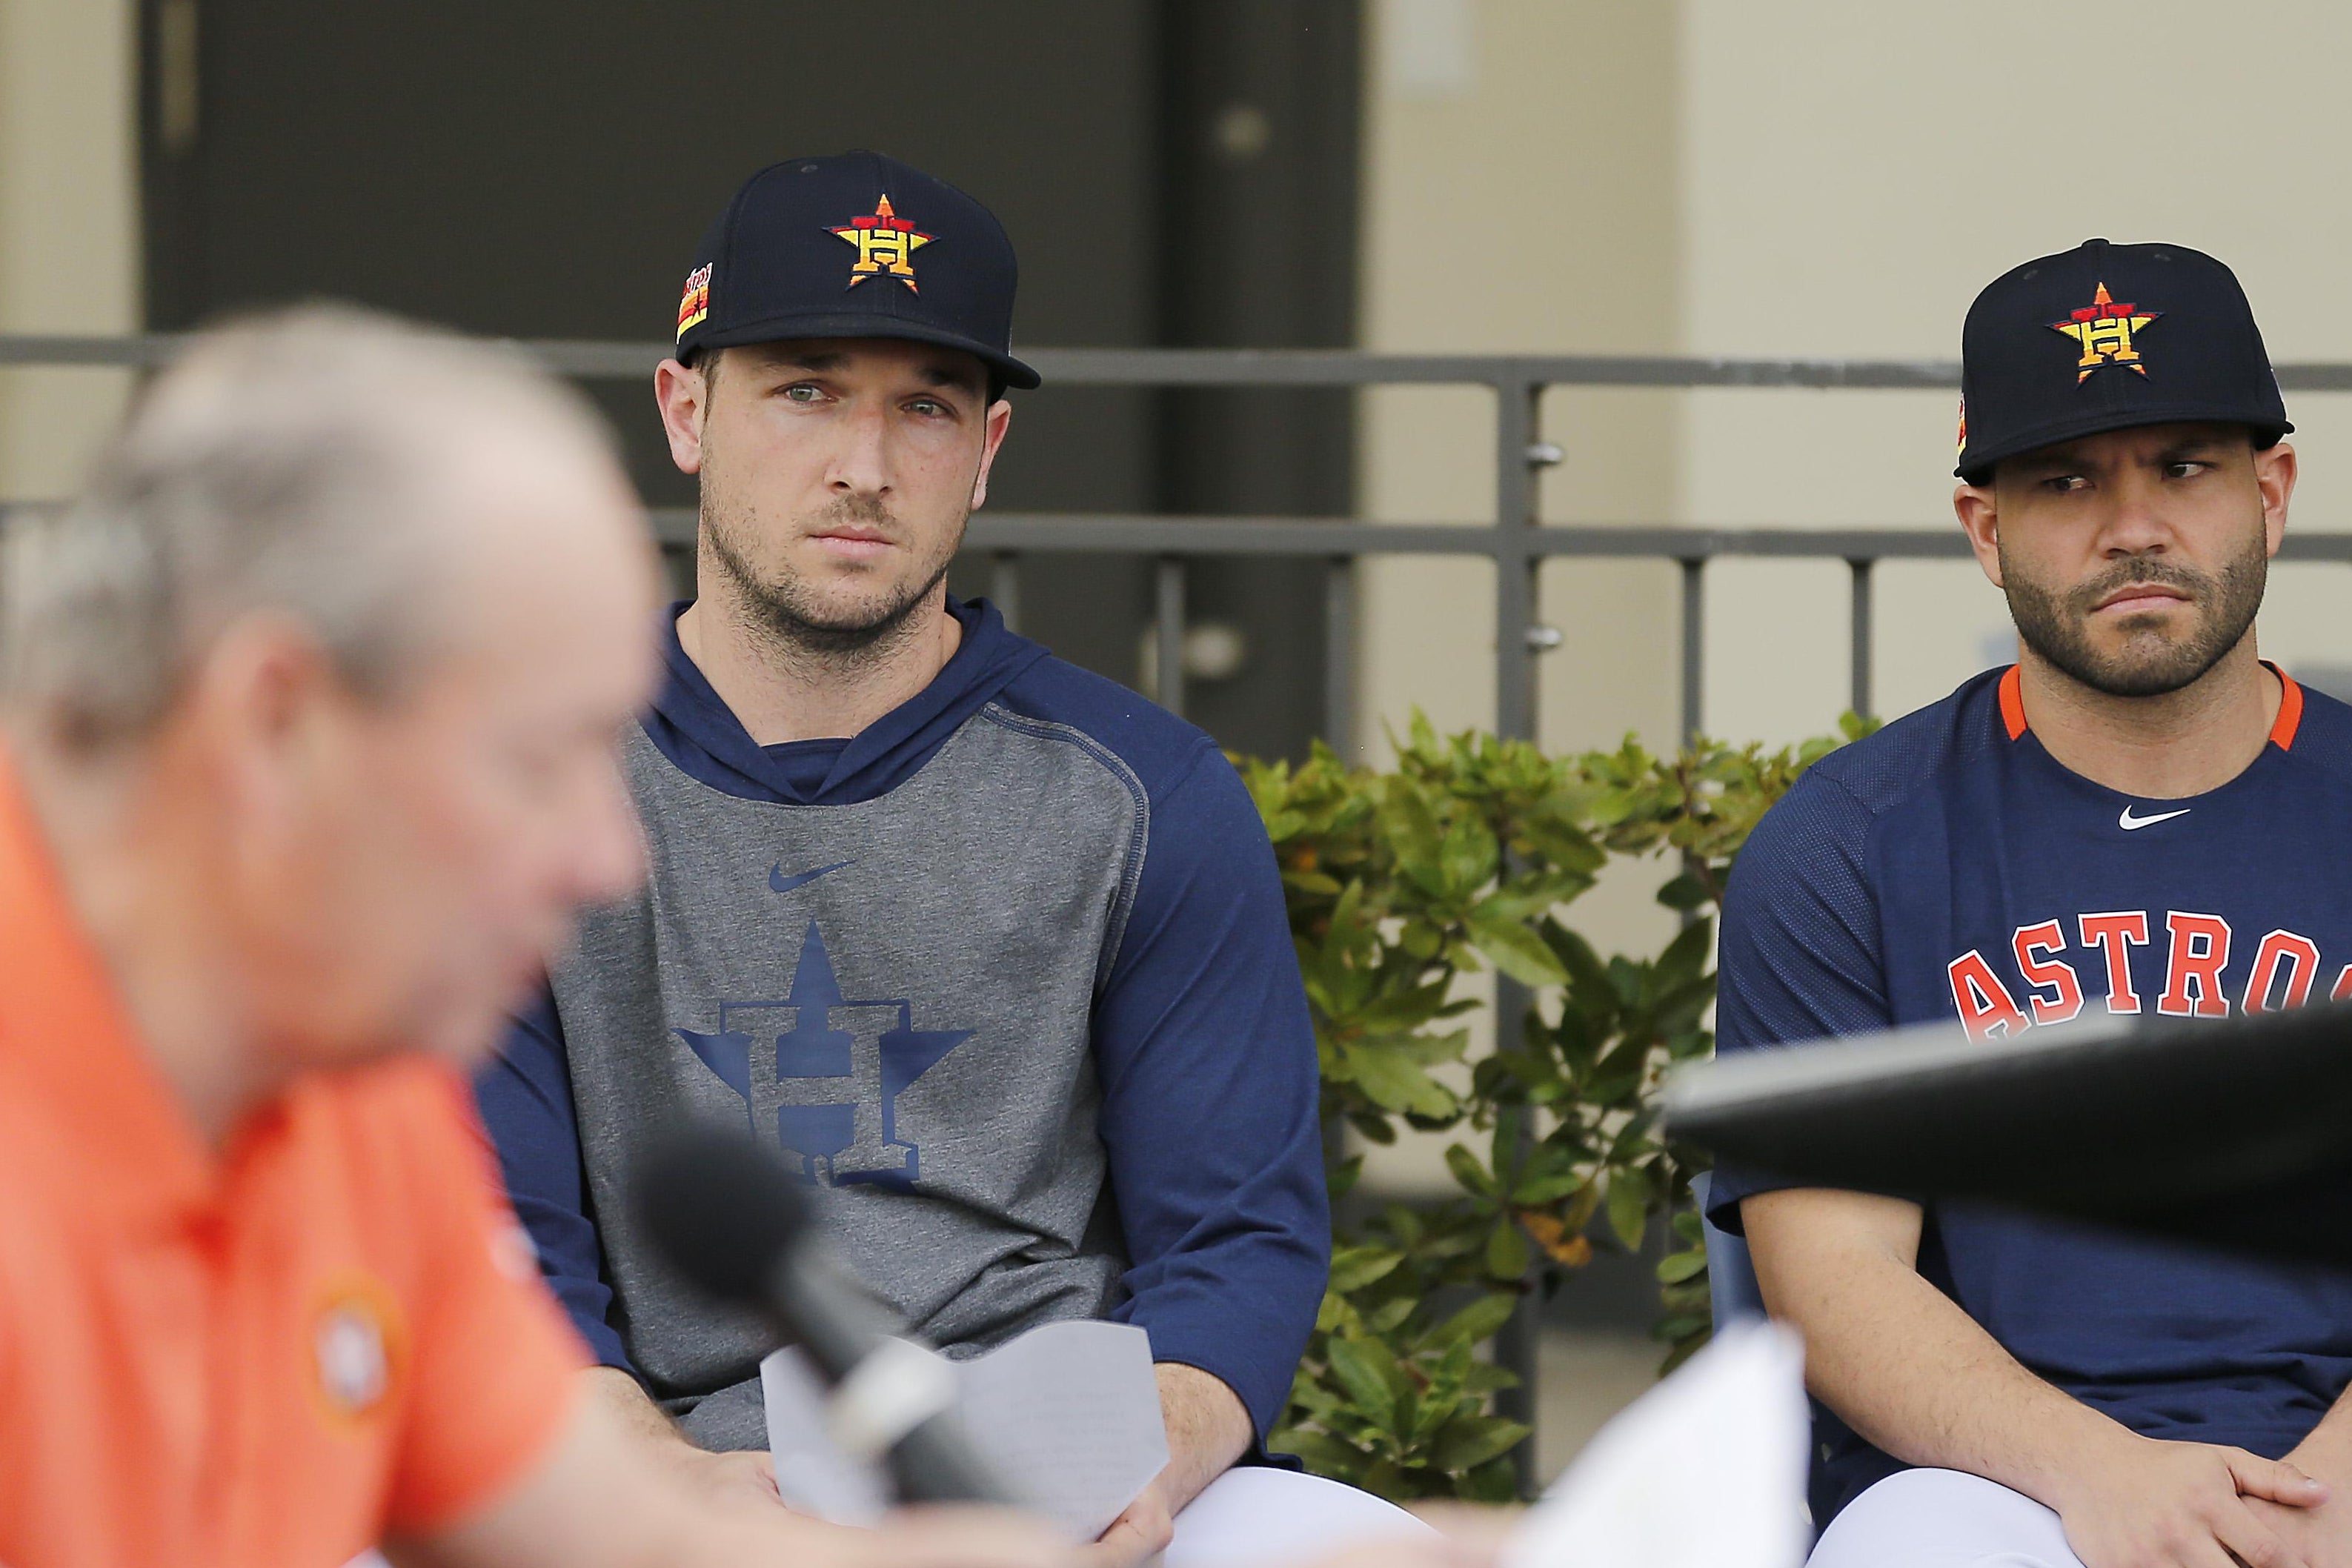 Alex Bregman and Jose Altuve, in warm ups and baseball hats, look on somewhat skeptically as Jim Crane reads seated at a table in front of a microphone in the foreground.